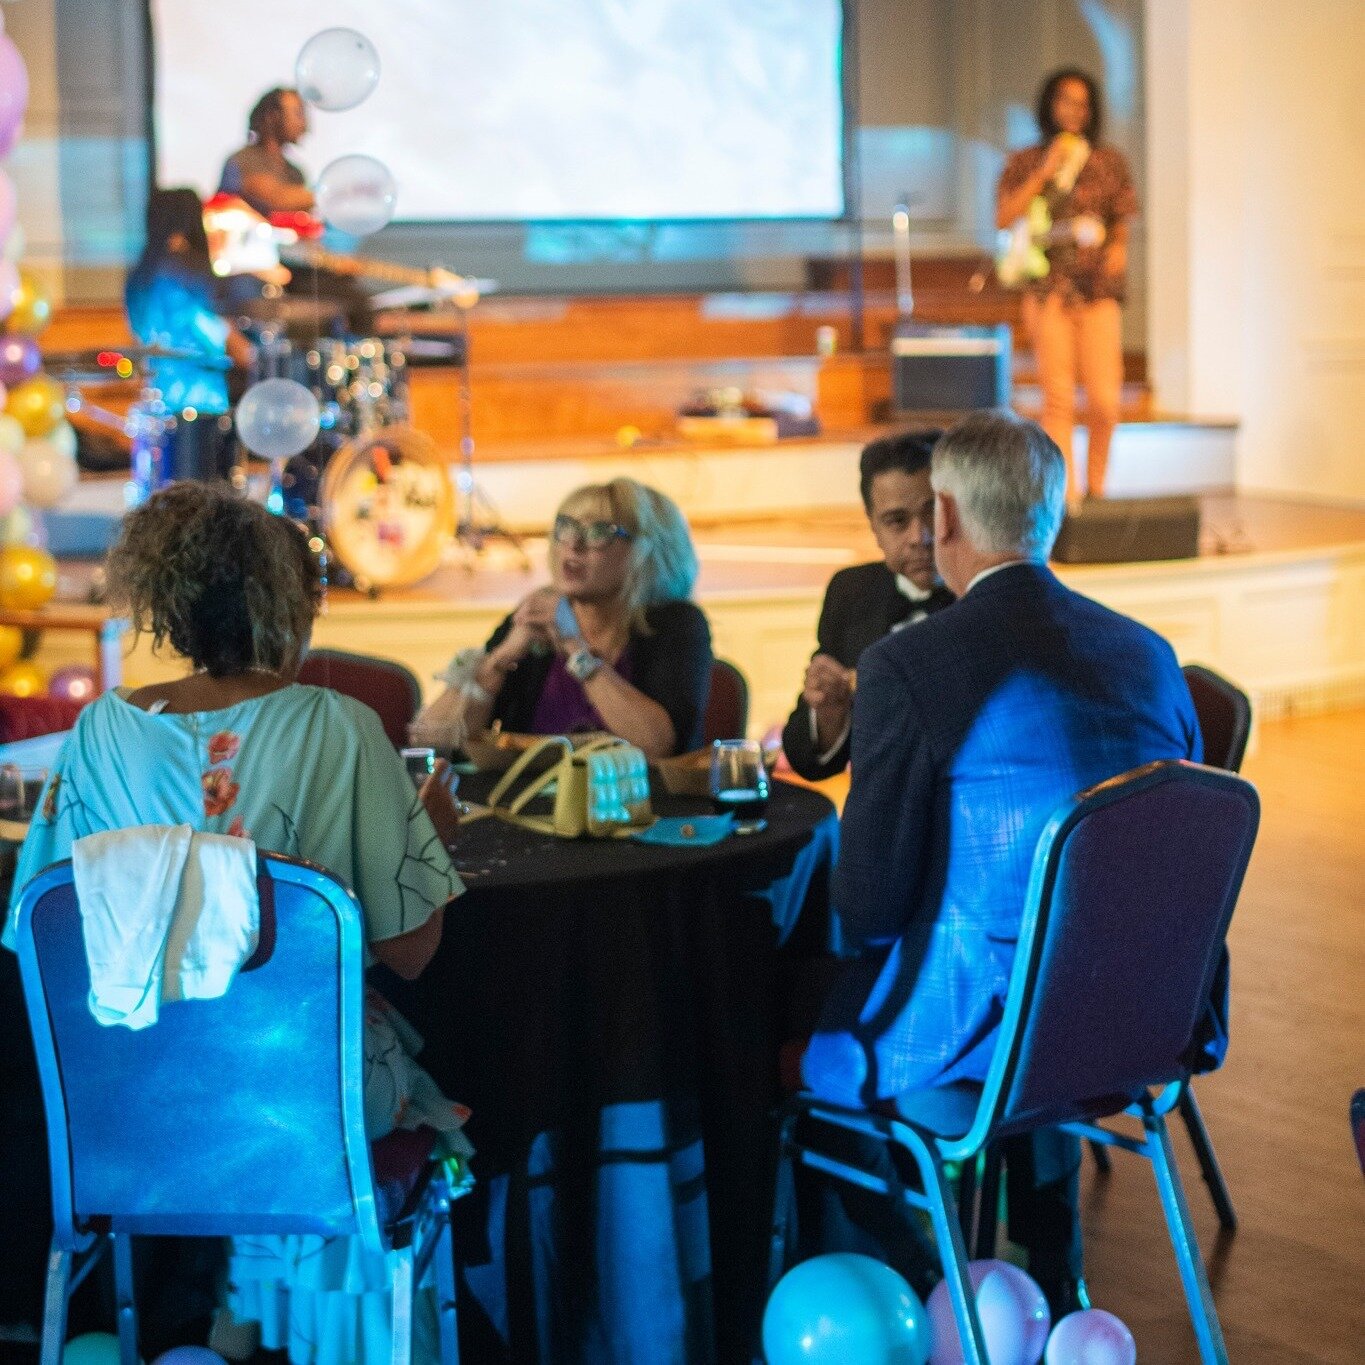 #2022Highlight: This was a year of firsts for AMOC fundraising and grants! 
we hosted our inaugural fundraiser - PROM
we received grant funding from @dallasculture, @tacadallas, and @moodyartsfund  for the first time!

In total, we raised over 30k in